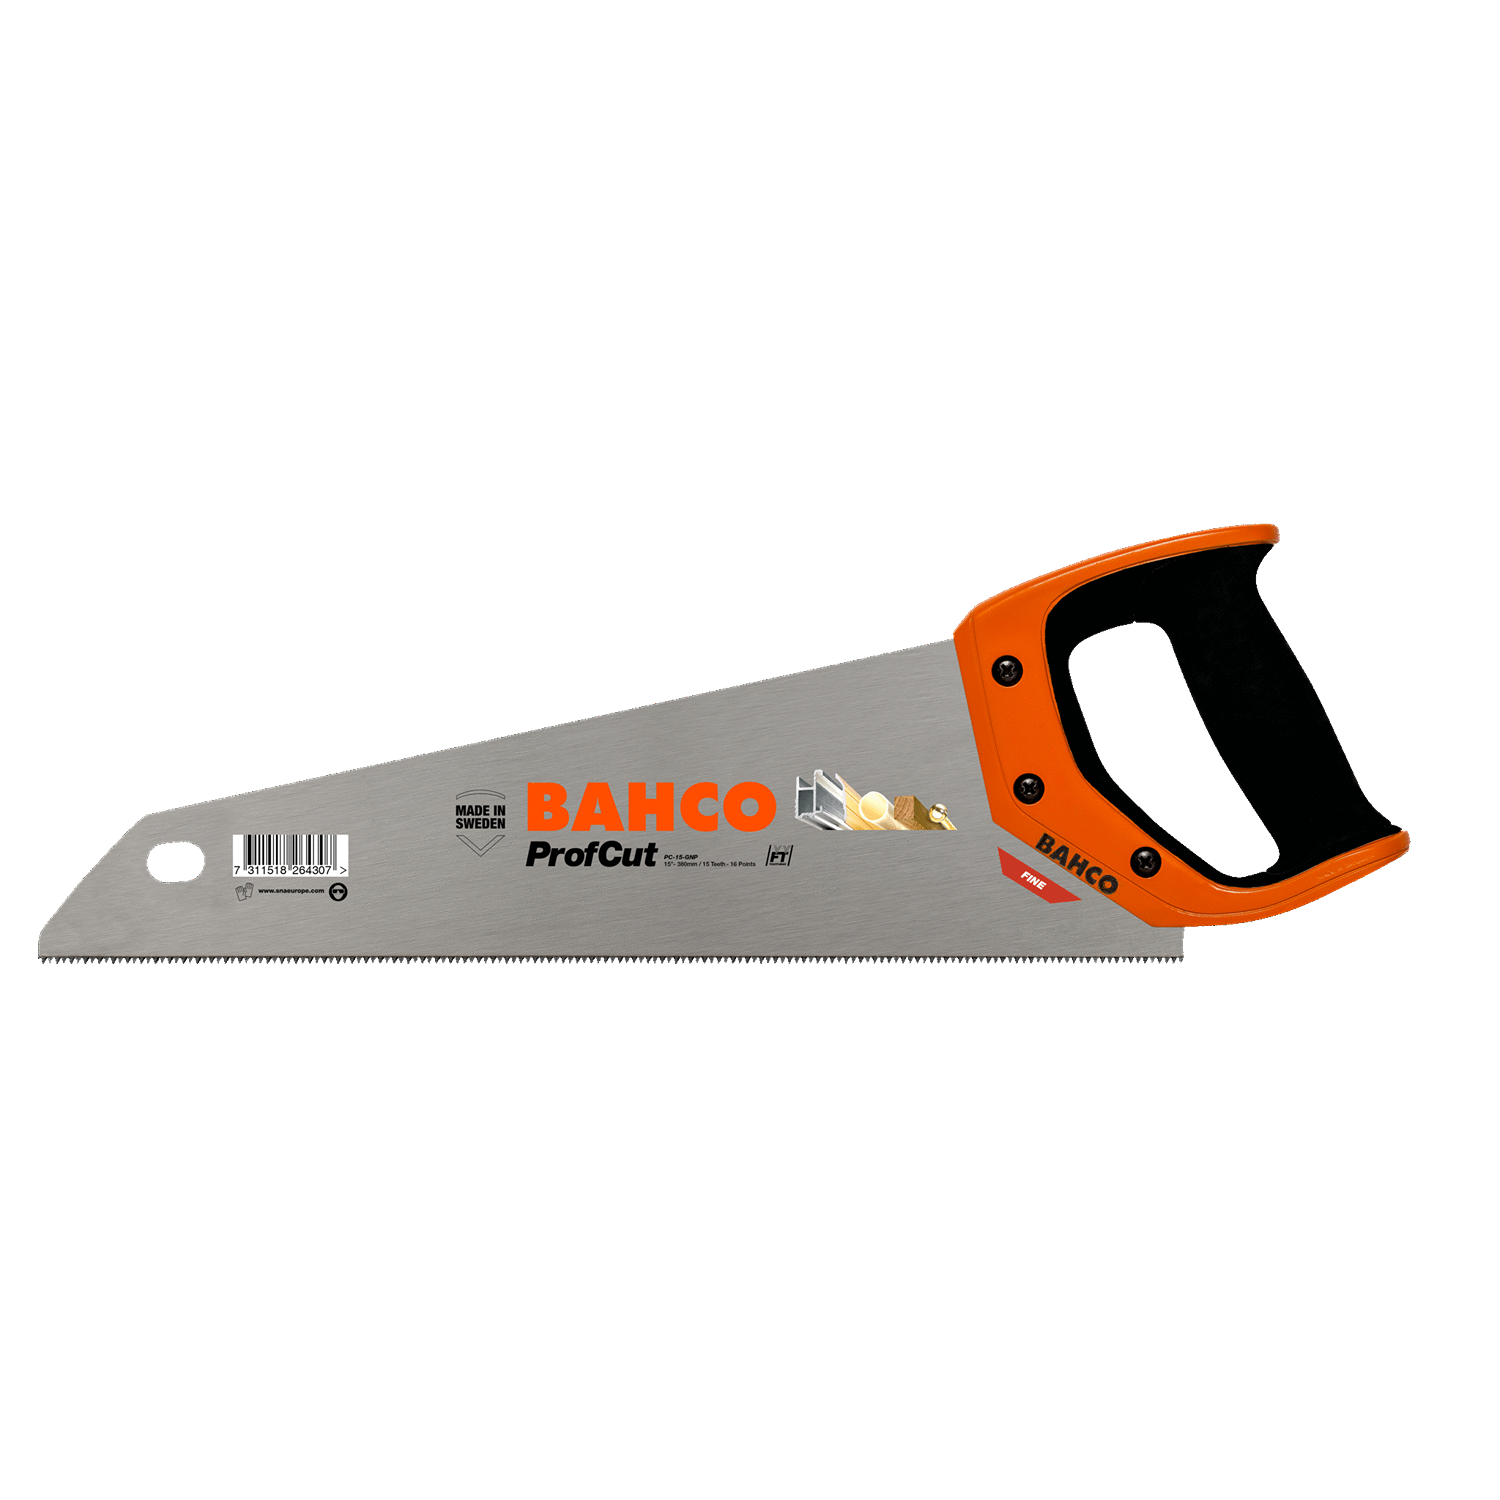 BAHCO PC-GNP ProfCut Toolbox General Purpose Handsaw - Premium Handsaw from BAHCO - Shop now at Yew Aik.